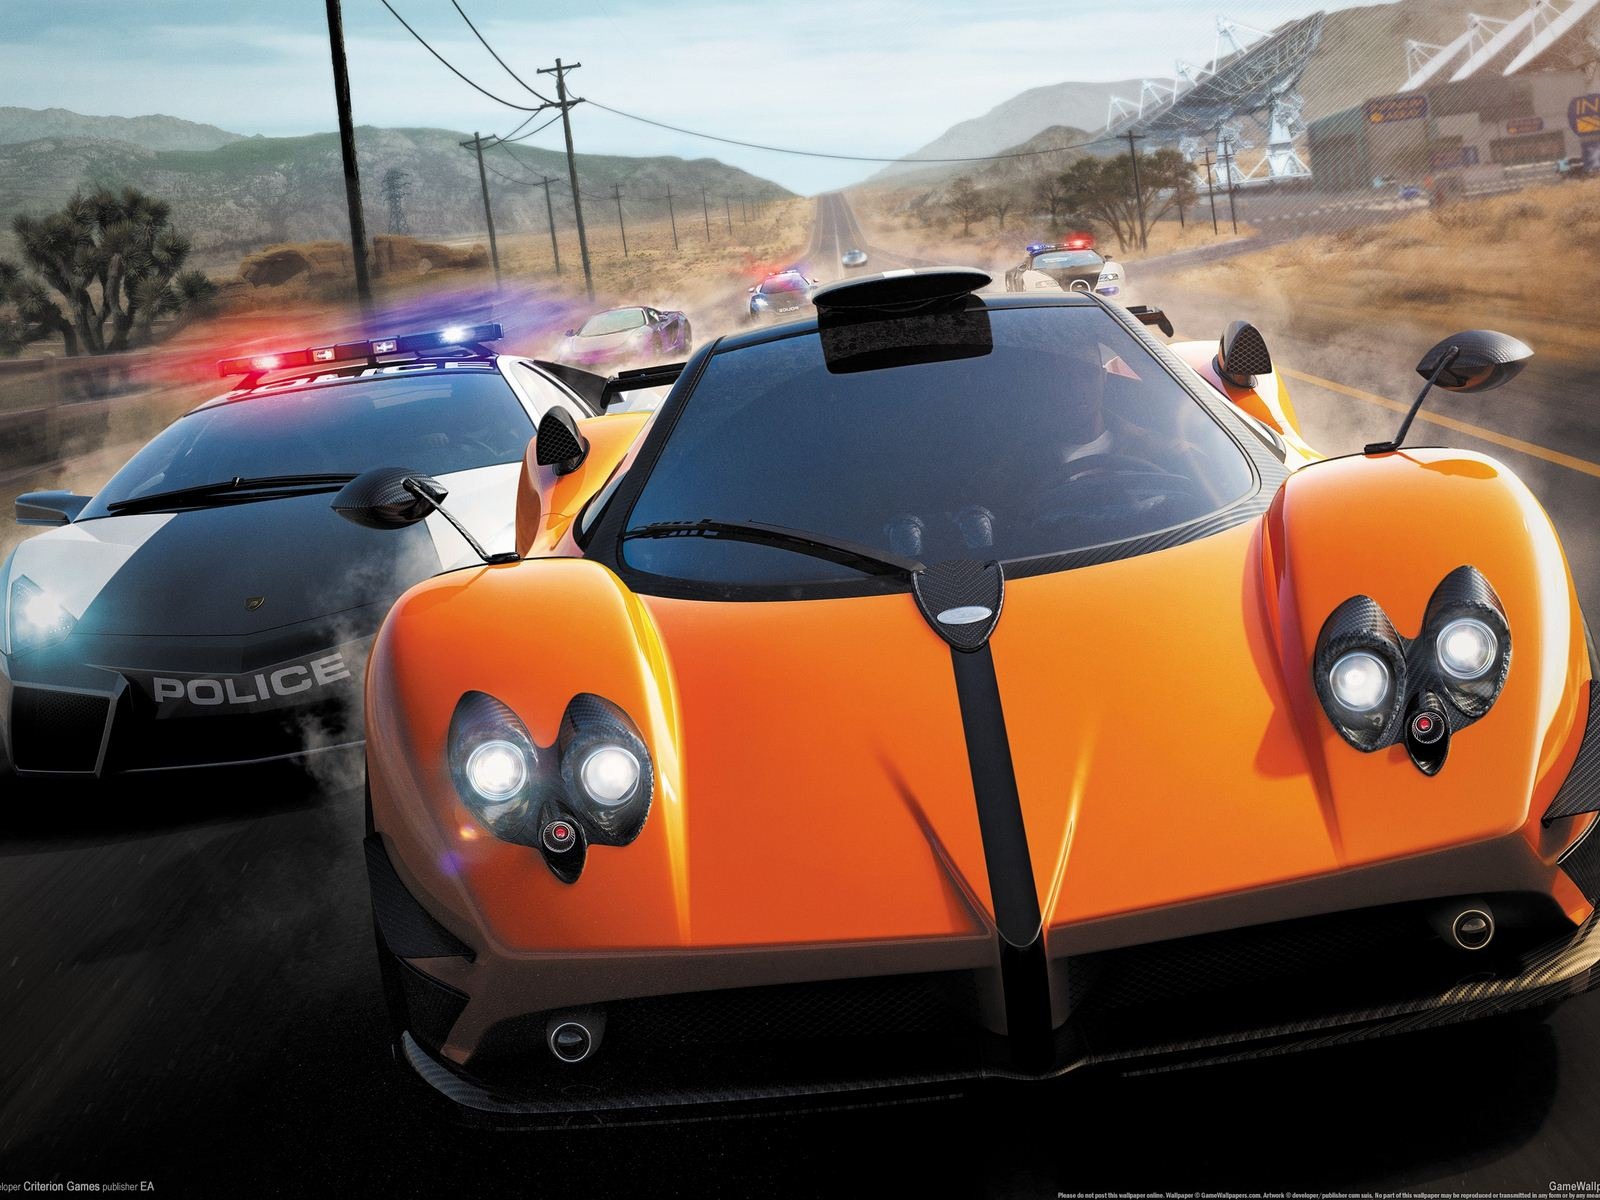 Need for Speed: Hot Pursuit 极品飞车14：热力追踪2 - 1600x1200